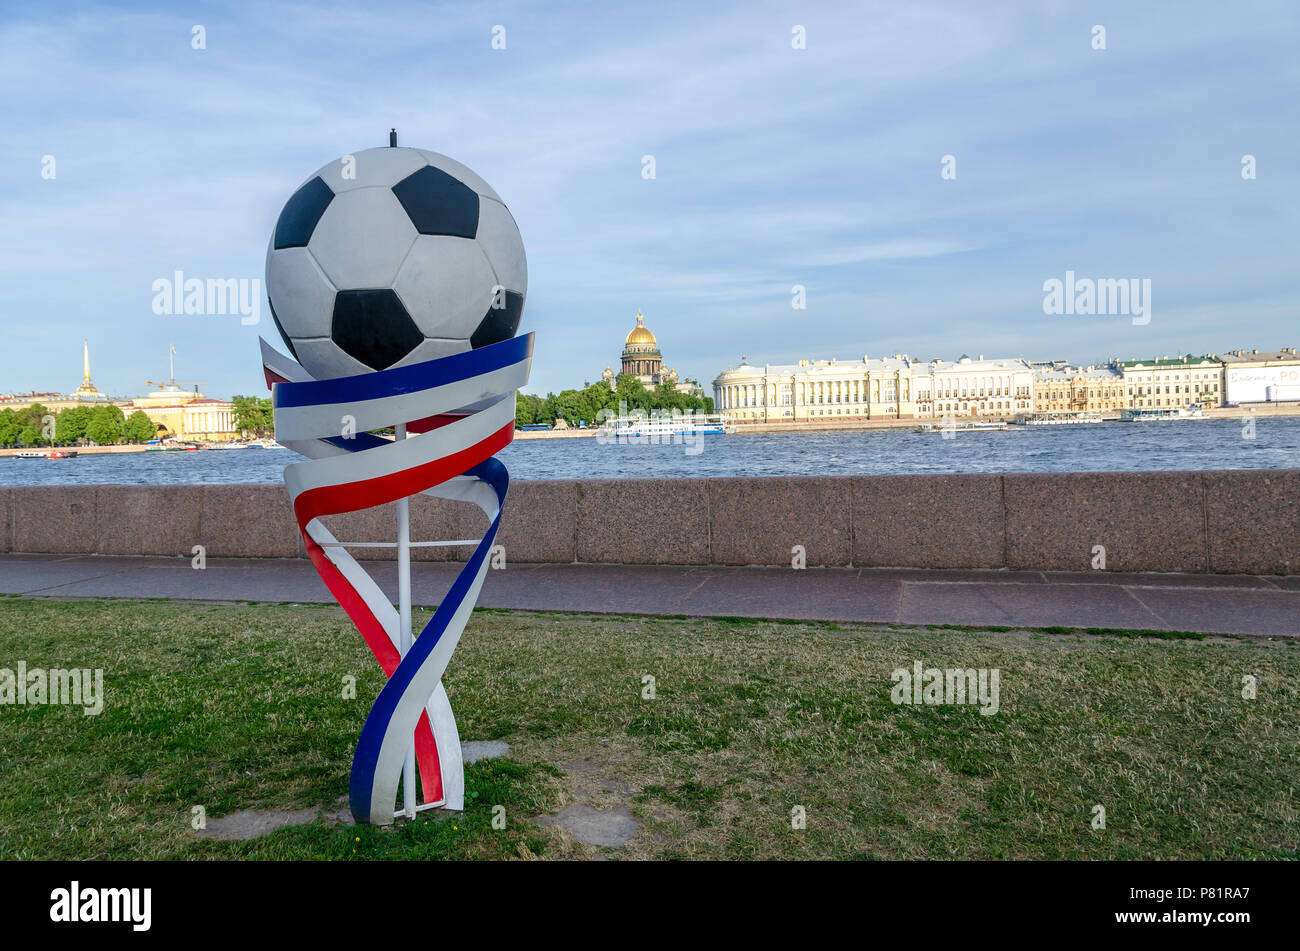 Football prop and Russian flag colours by the Neva river in St Petersburg to mark the FIFA World Cup 2018 held in the country. Stock Photo